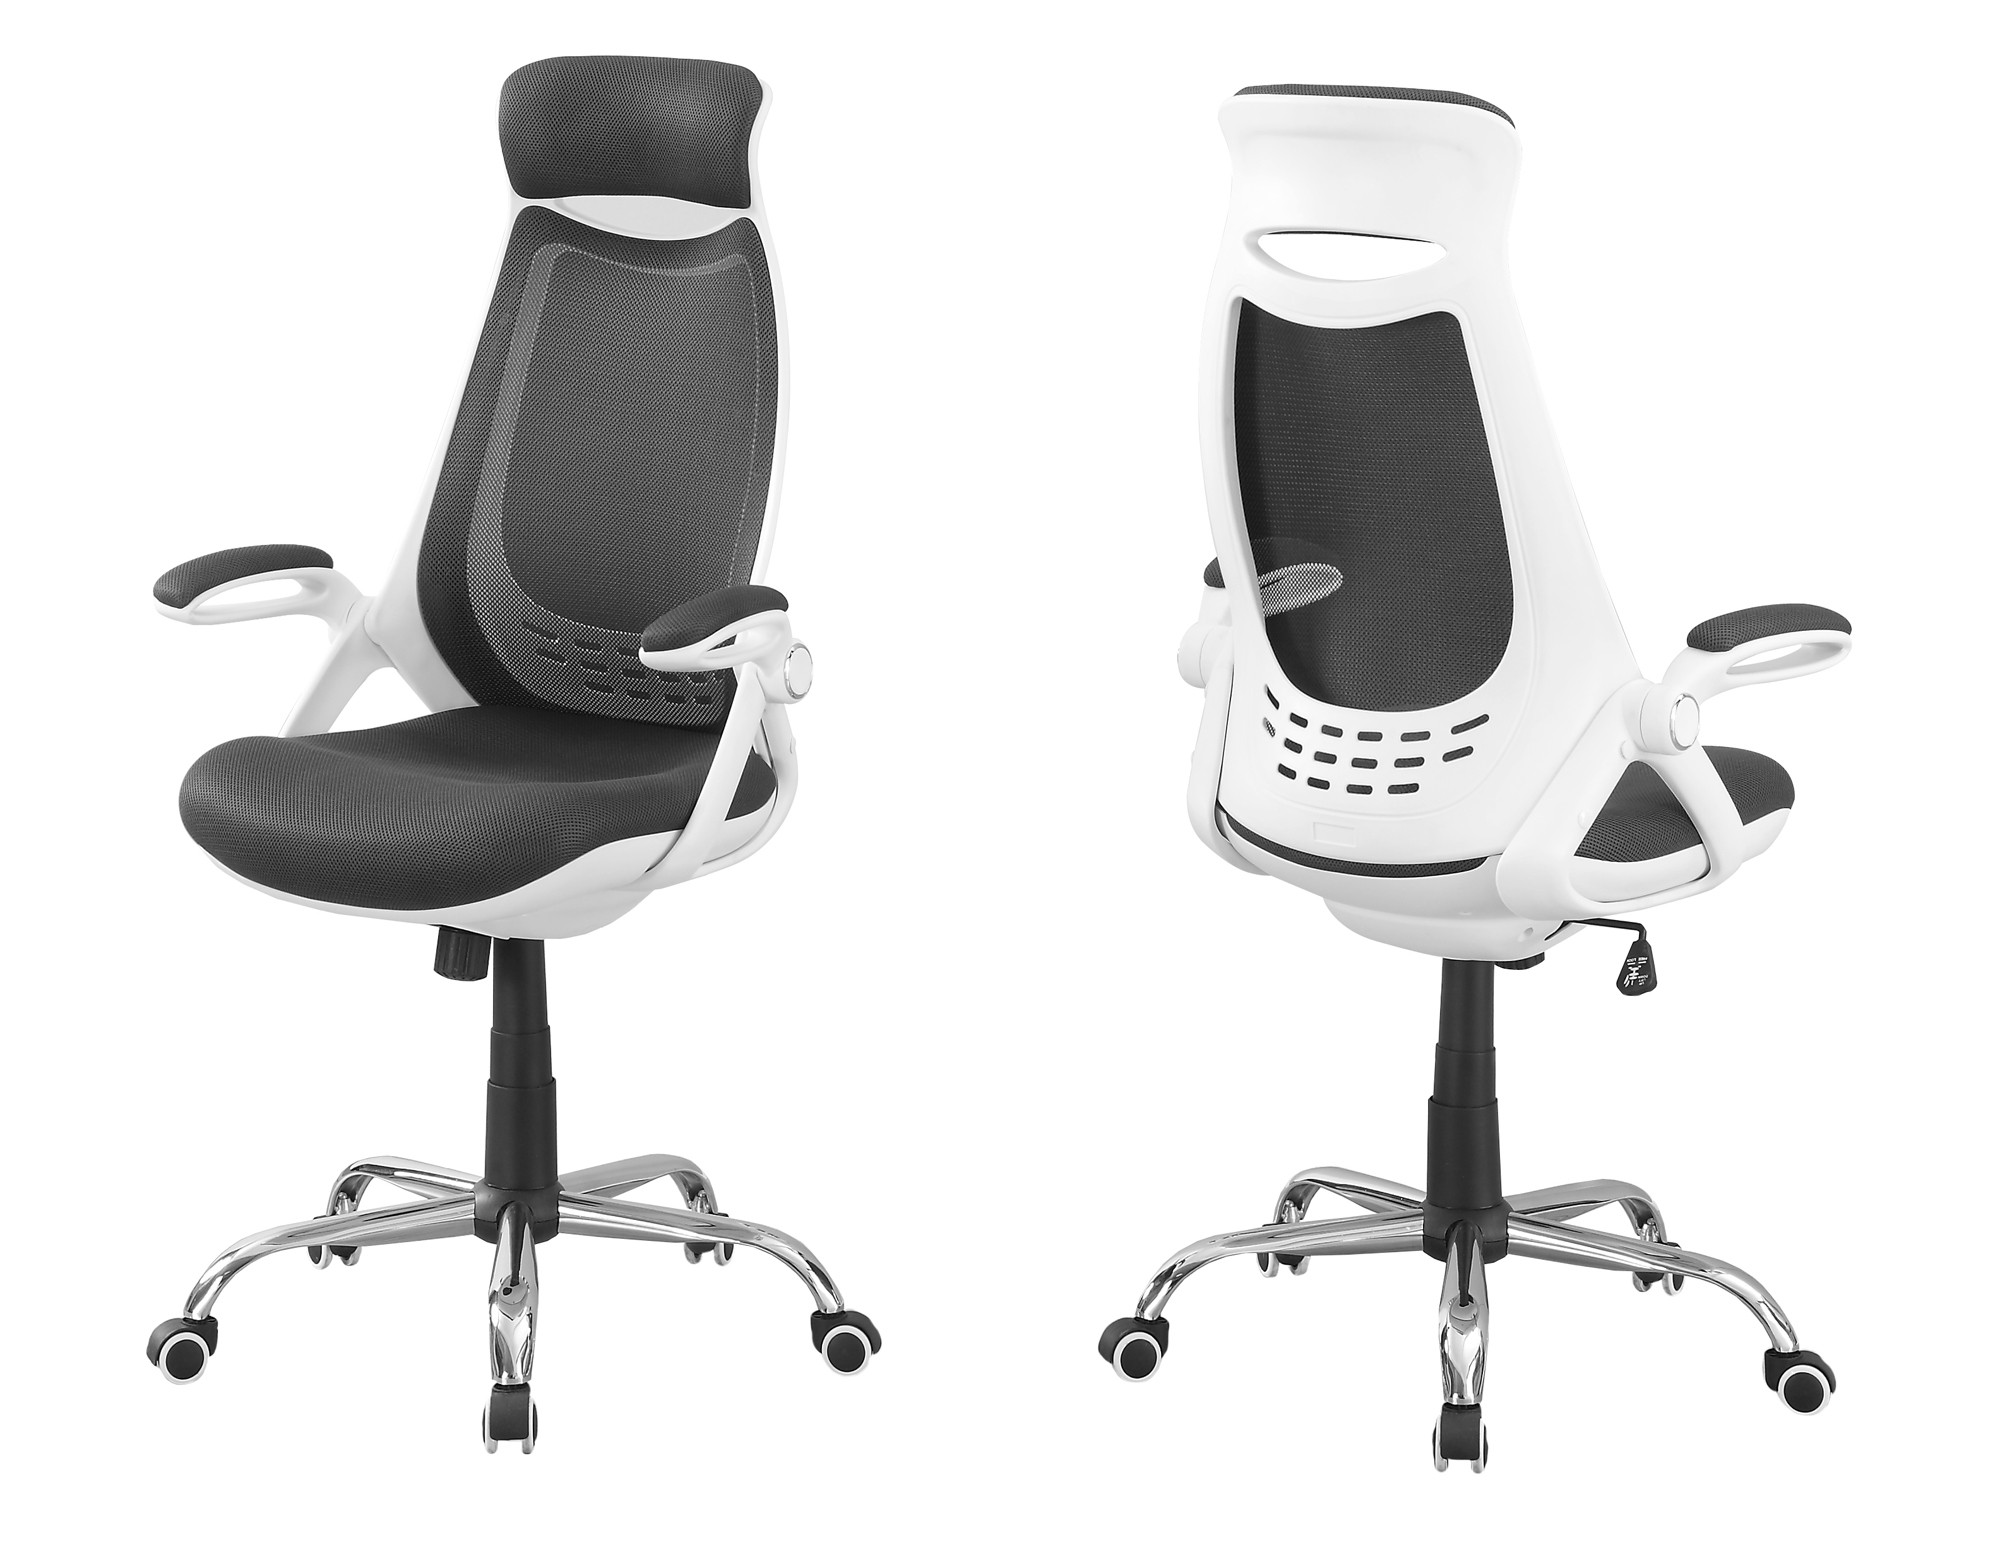 23.75" x 28" x 93.75" White Grey Foam Office Chair With A High Back